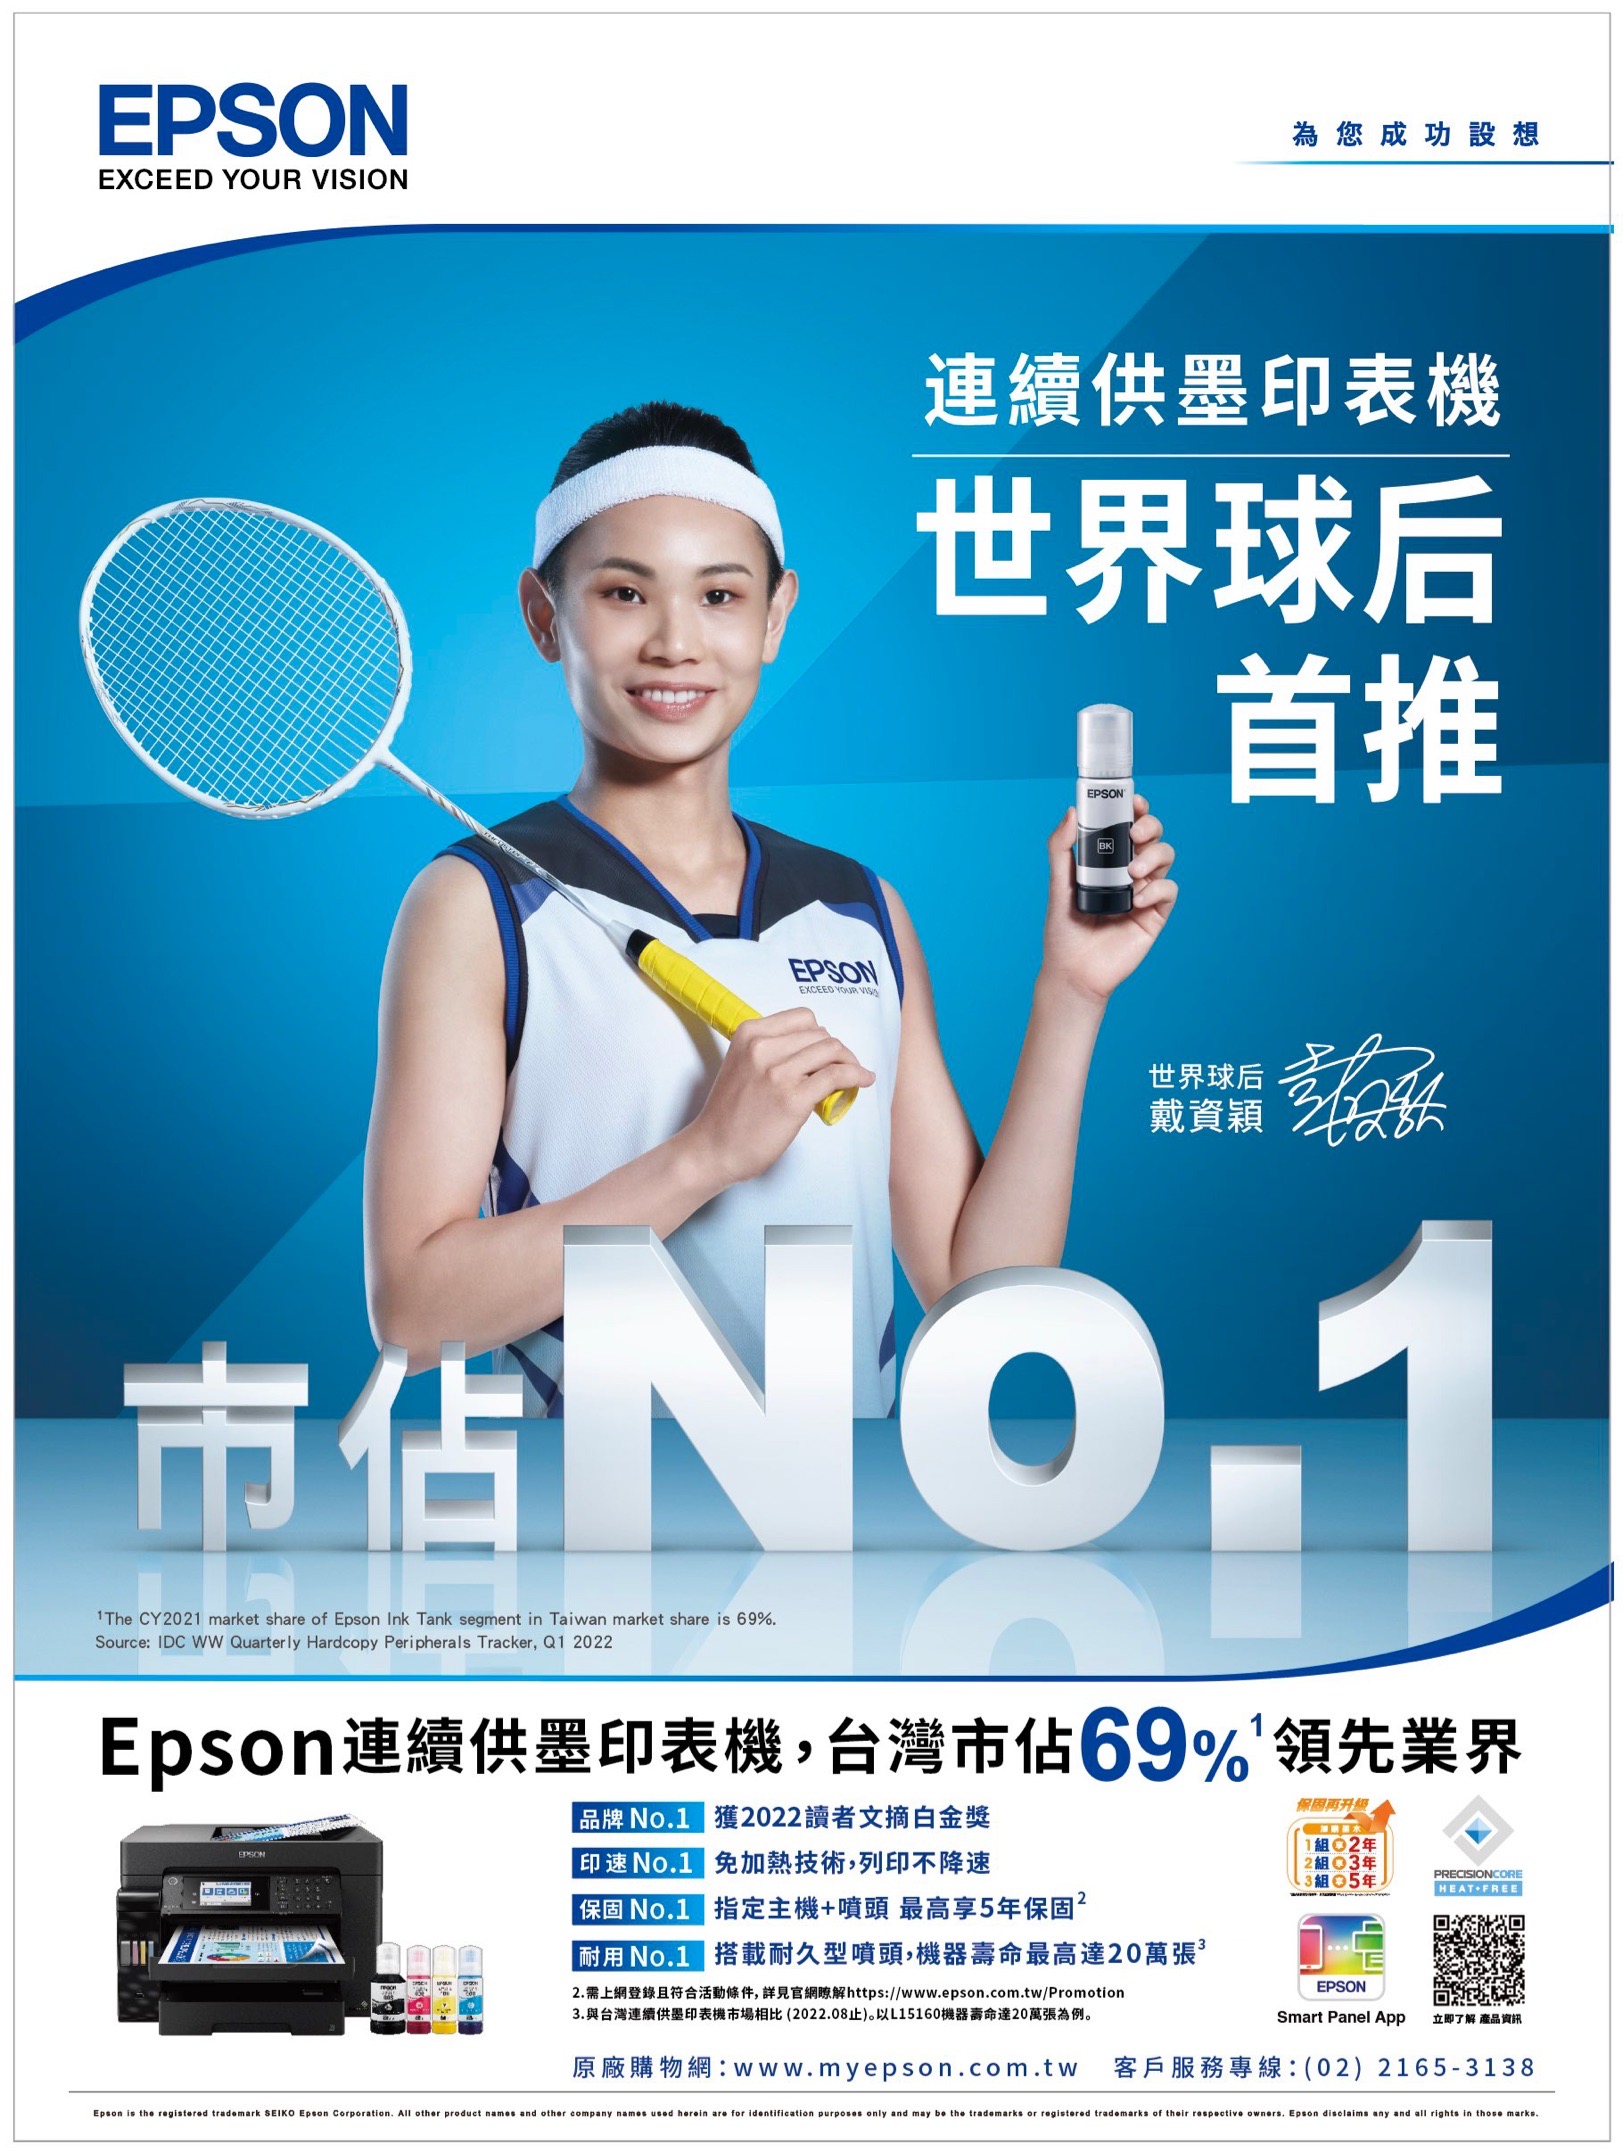 EPSONEXCEED YOUR ONEPSONEXCEED YOUR VISIz\]QsѾL@ɲyZEPSONBK@ɲyZo1The CY1 market share of Epson Ink Tank segment in Taiwan market share is 69%.Source: IDC  Quarterly Hardcopy Peripherals Tracker, Q1 2022EpsonsѾL,xW69%~EPSON~P No.1 2022Ṳ̄KժLNo.1 K[޳N,CLtOT No.1 wD+QY ̰5OT2@ No.1 f@[QY,ةR̰F20Ui2. ݤWnBŦXʱ,ԨxAhttps://www.epson.com.tw/Promotion3.PxWsѾLۤ(2022.08)CHL15160ةRF20UiҡCOT1022զ~ 5~PRECISIONCORE HEAT+FREEEPSONSmart Panel AppߧYF ~Ttʪ:www.myepson.com.tw ȤAȱMu:(02)2165-3138Epson is the registered trademark SEIKO Epson Corporation. All other product names and other company names used herein are for identification purposes only and may  the trademarks or registered trademarks of their respective owners. Epson disclaims any and all rights in those marks.